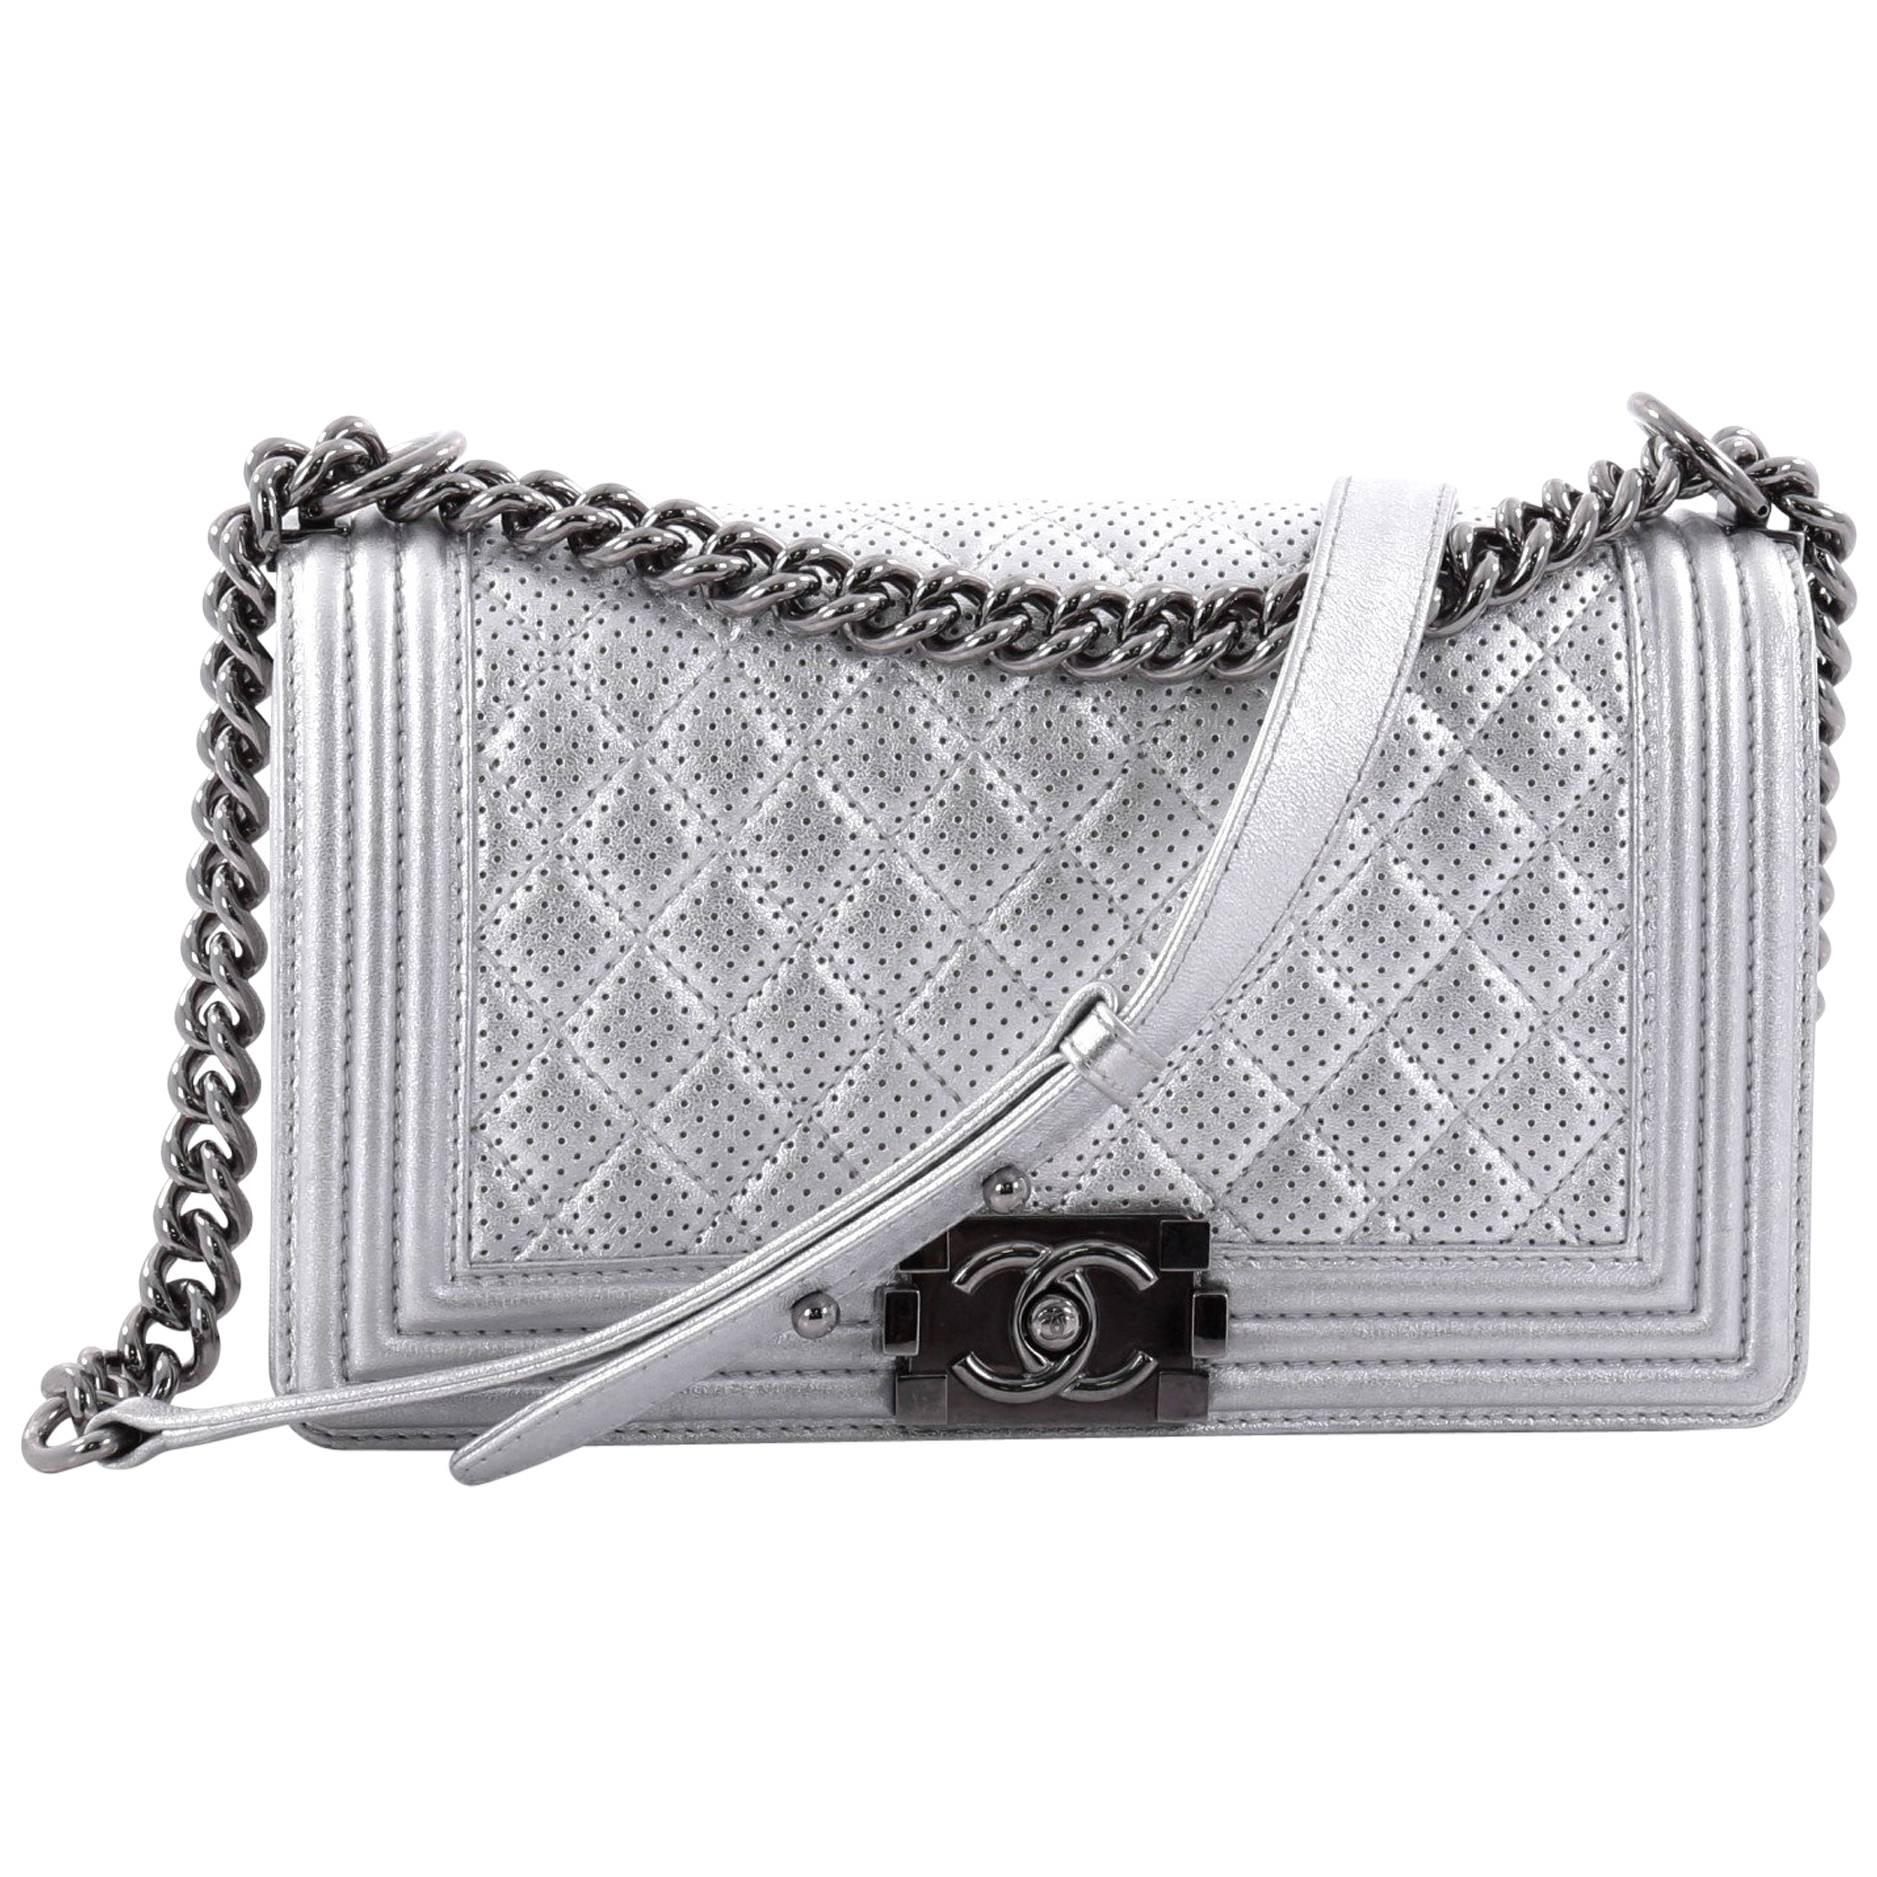  Chanel Boy Flap Bag Quilted Perforated Lambskin Old Medium